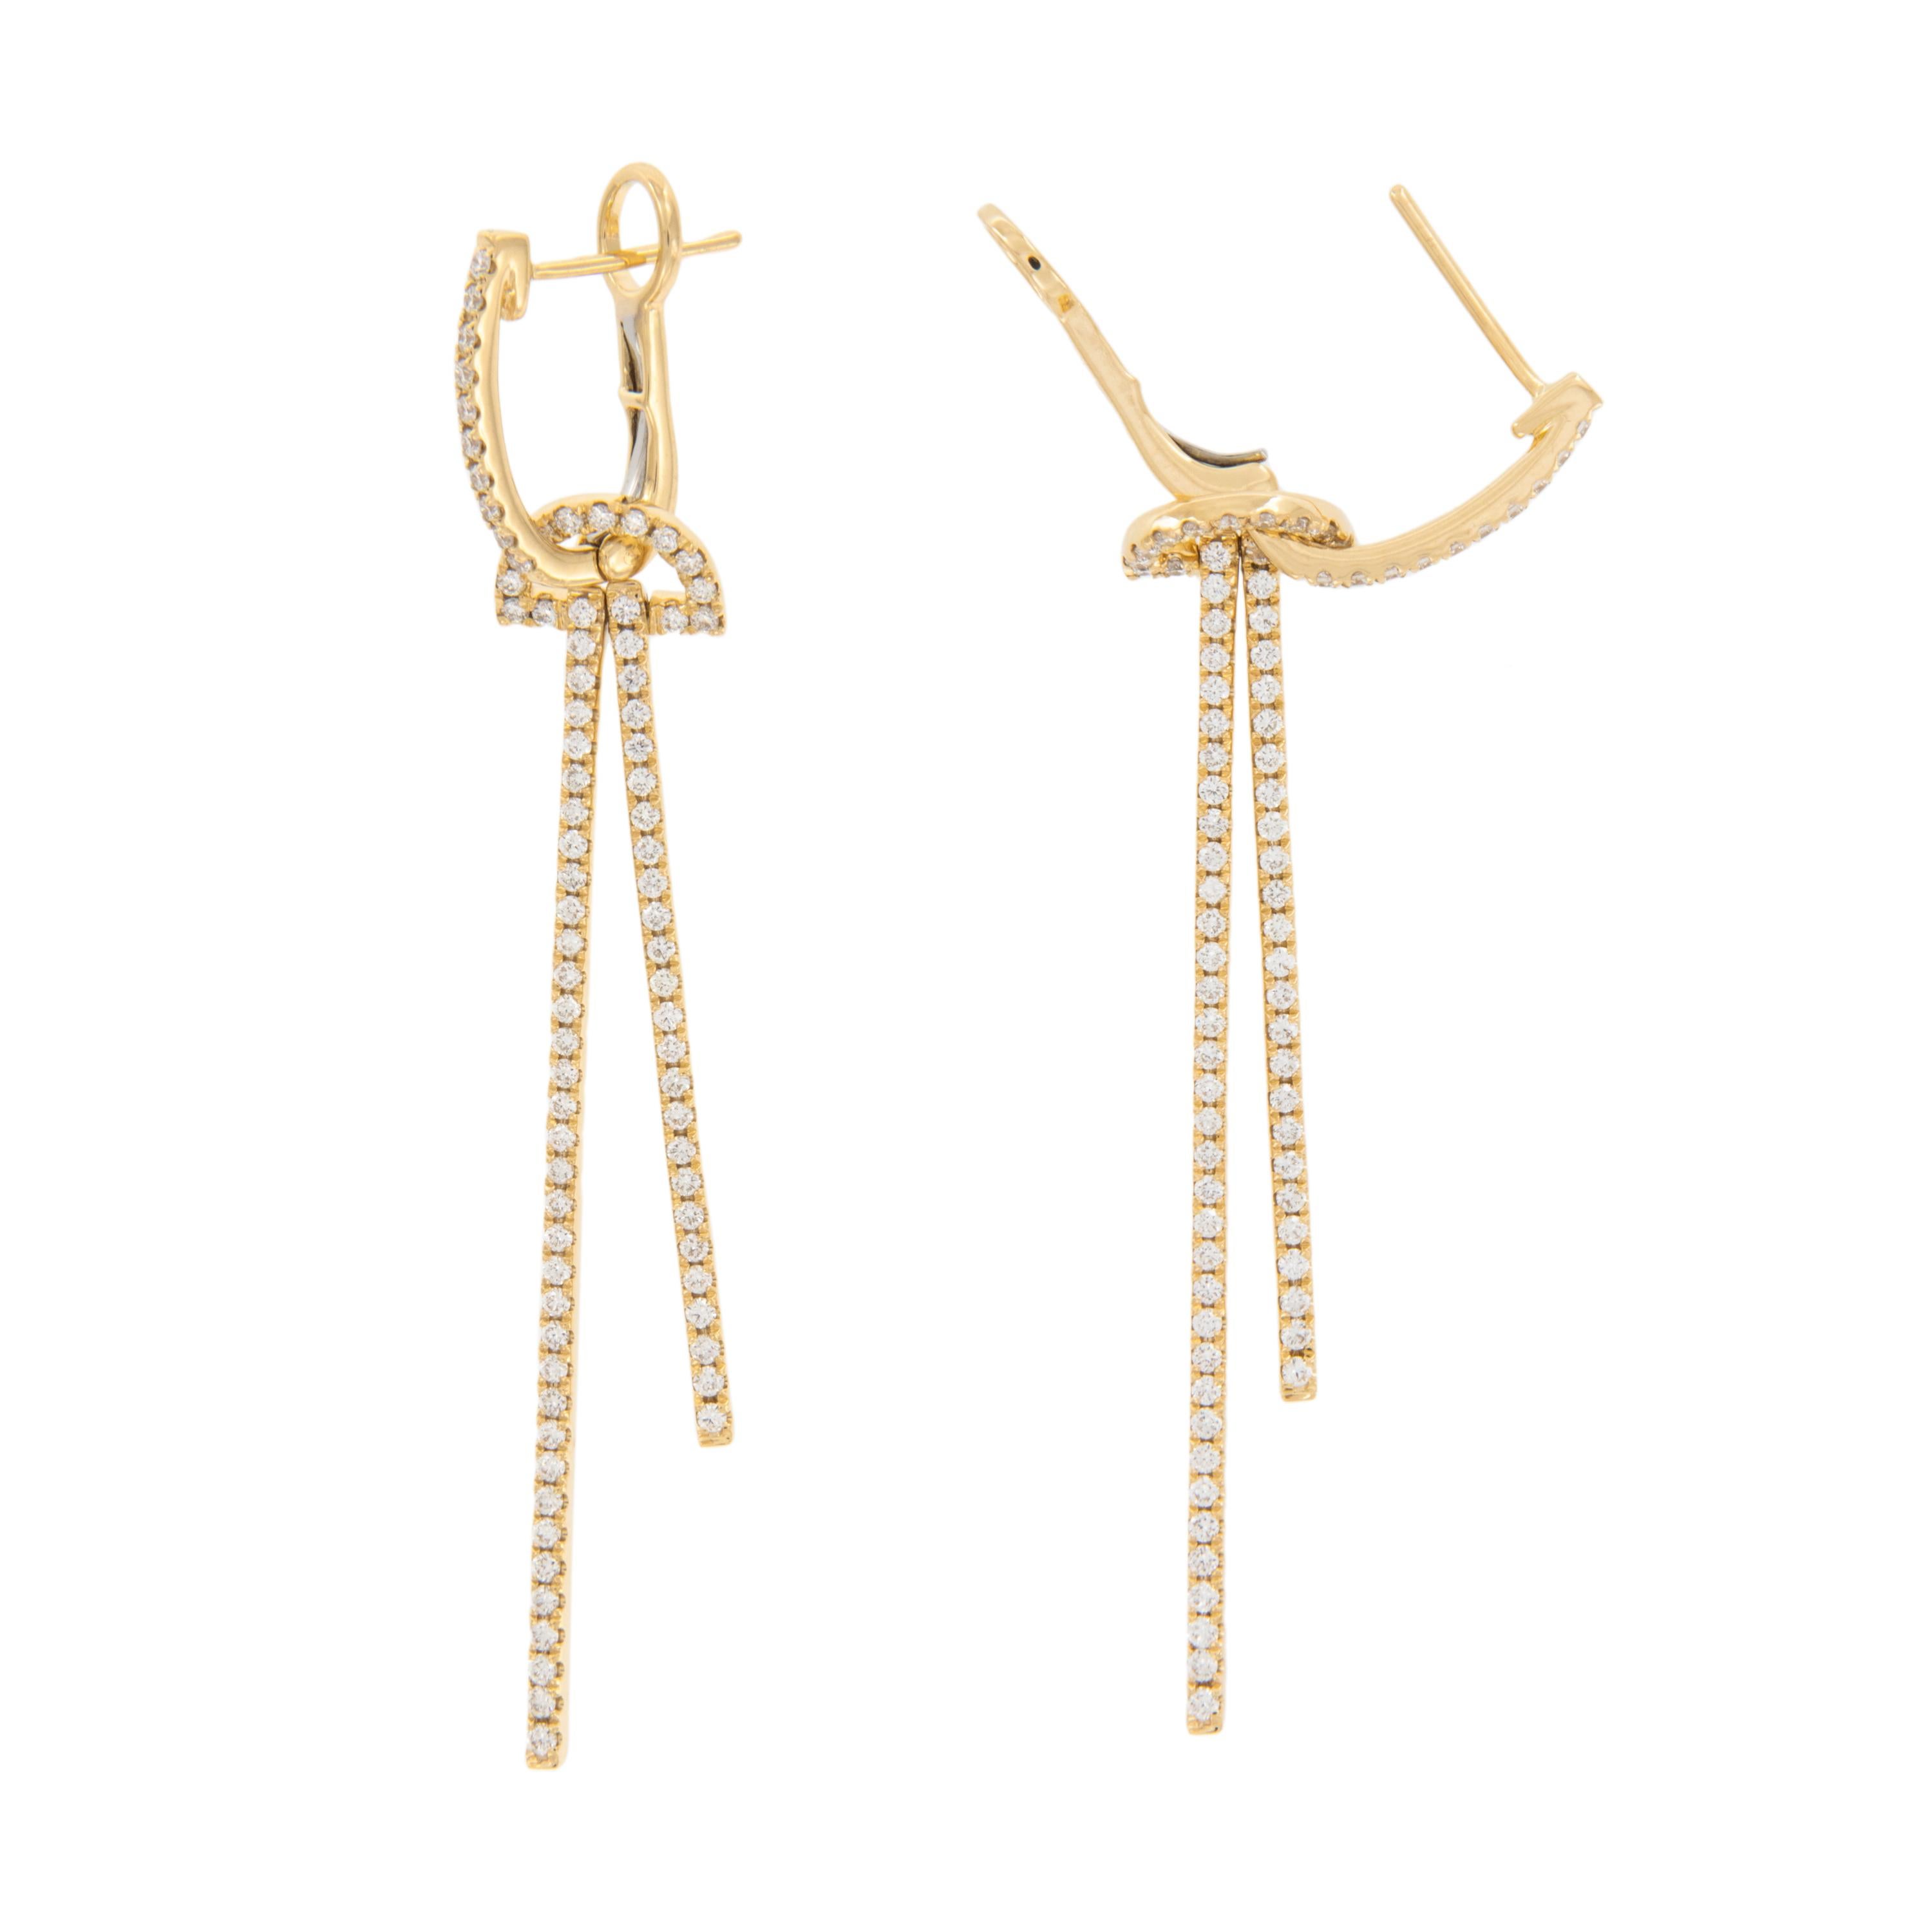 Iconic Art Deco style married to rich 18 karat yellow gold and diamonds - these eye catching earrings are a must have! From semi hoop top and half circle hang two diamond sticks of different lengths, both being free moving to sway & catch the light